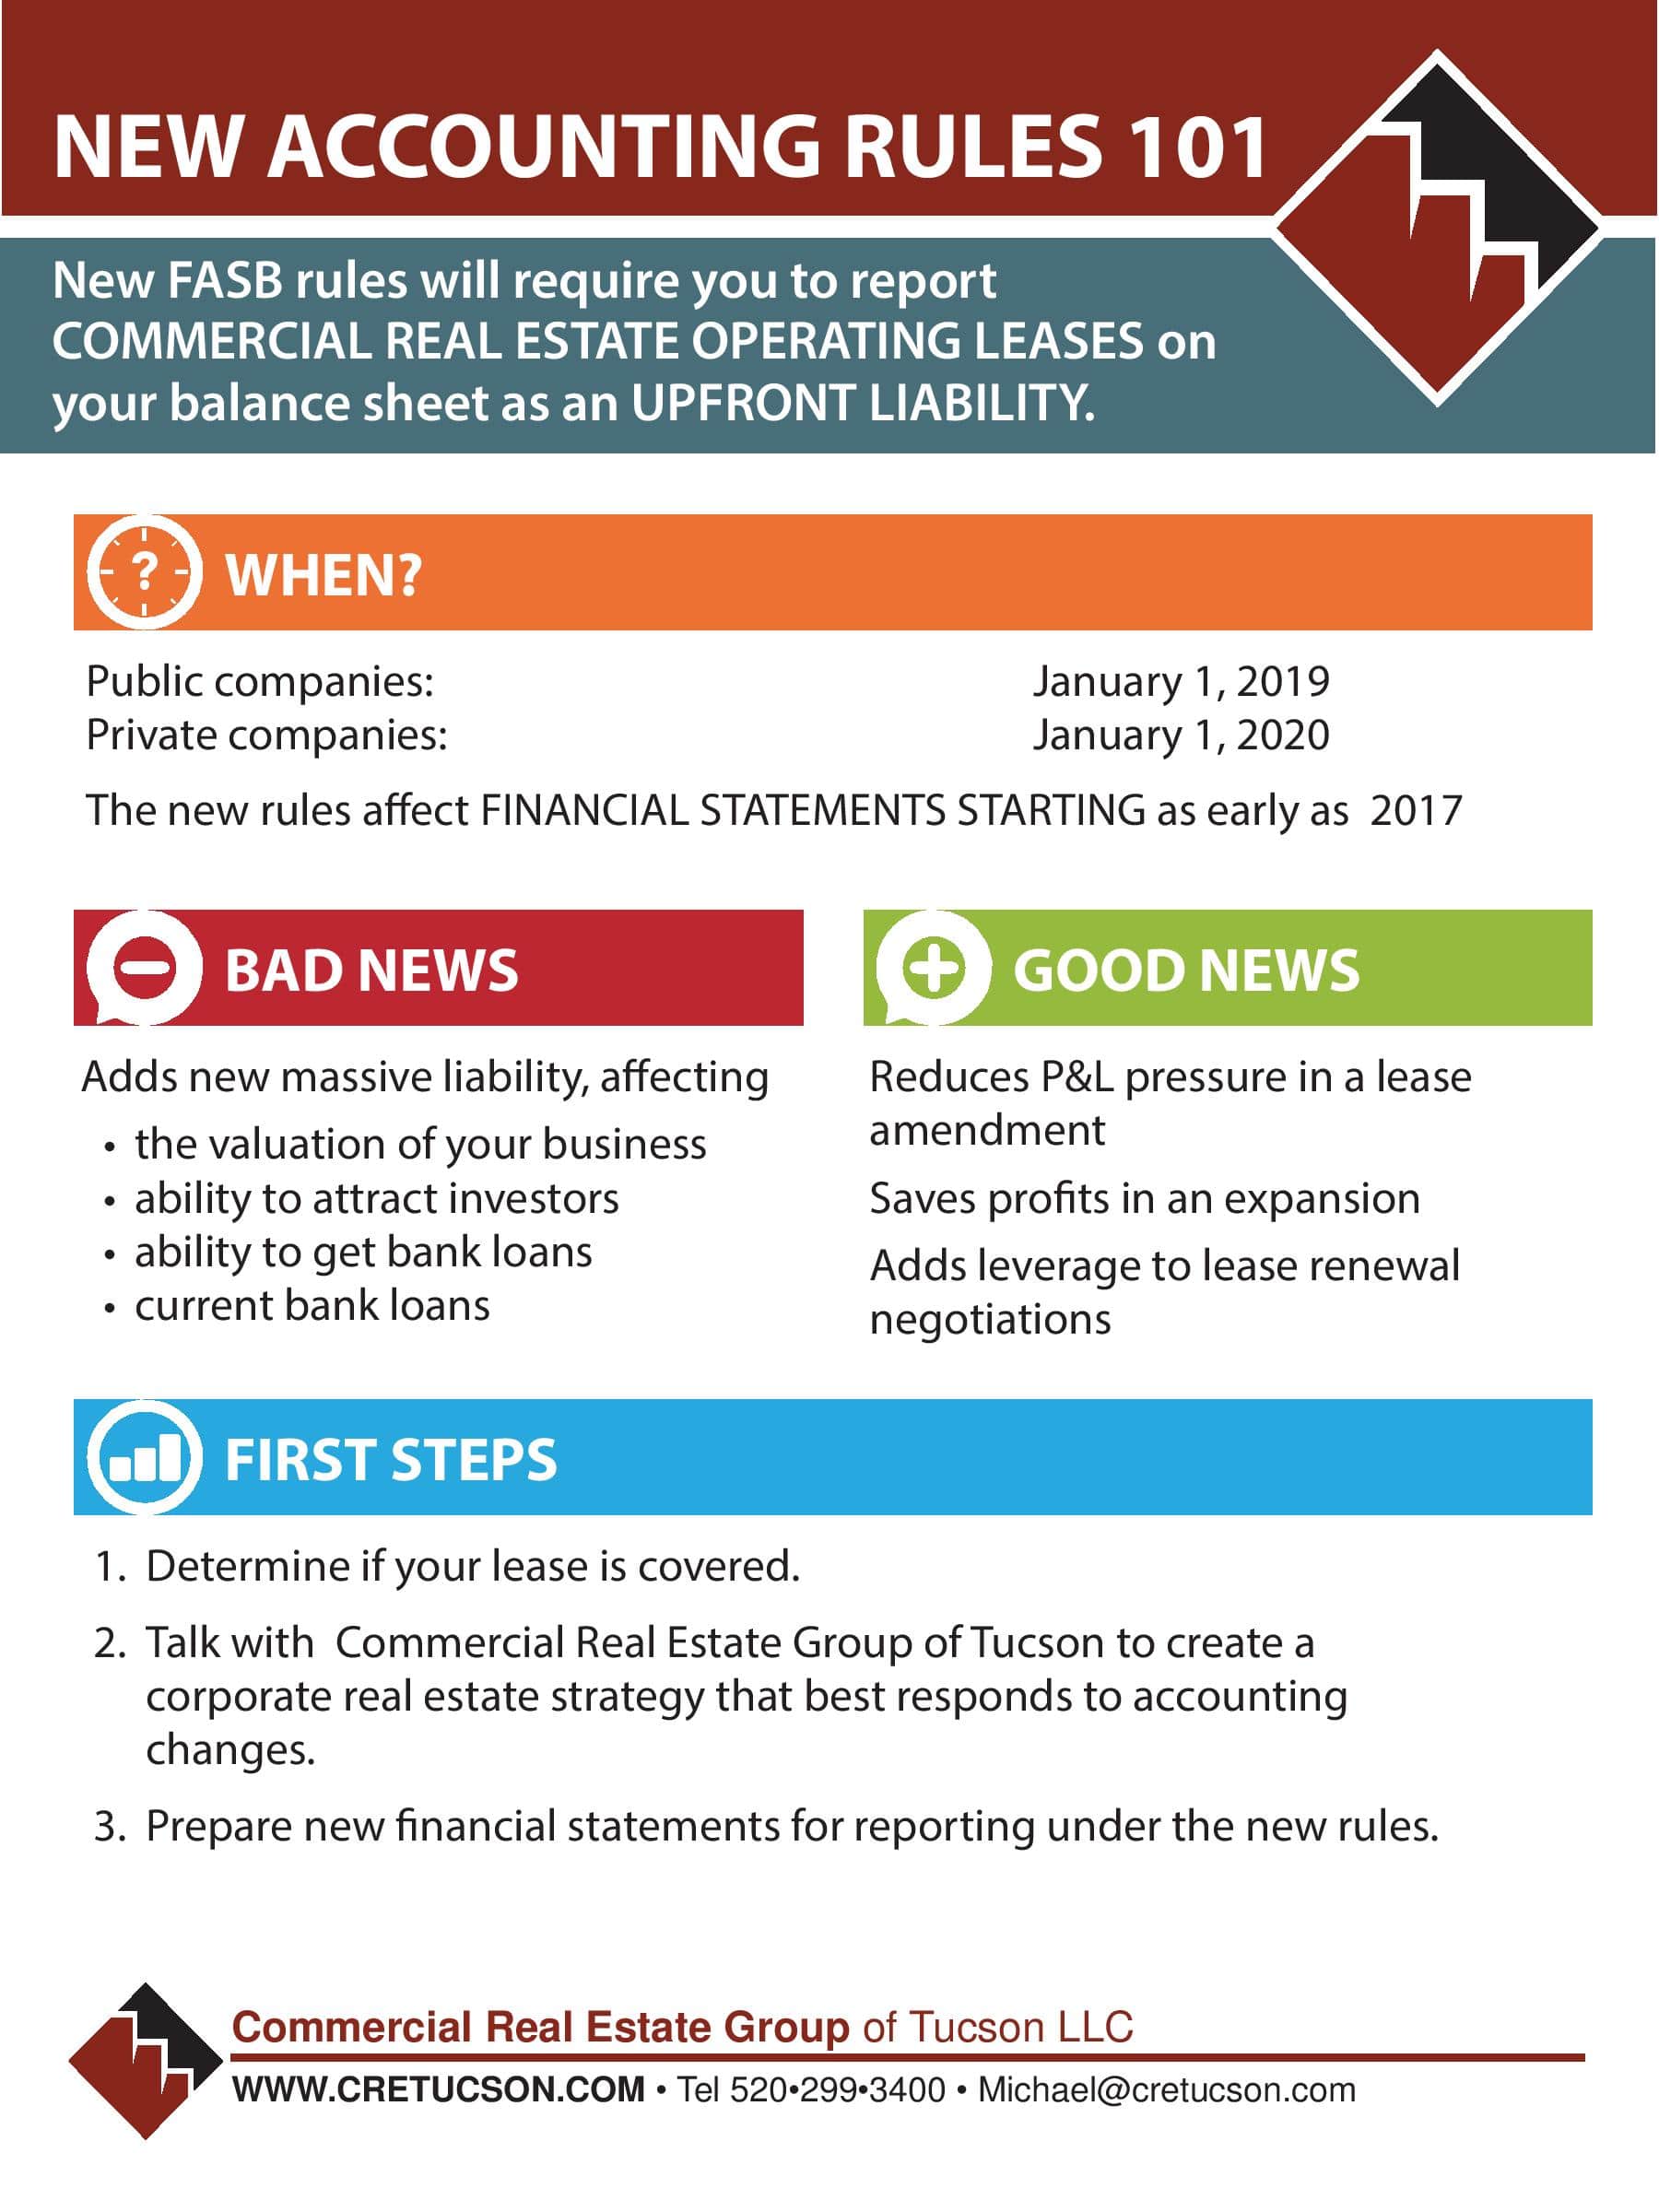 FASB Infographic